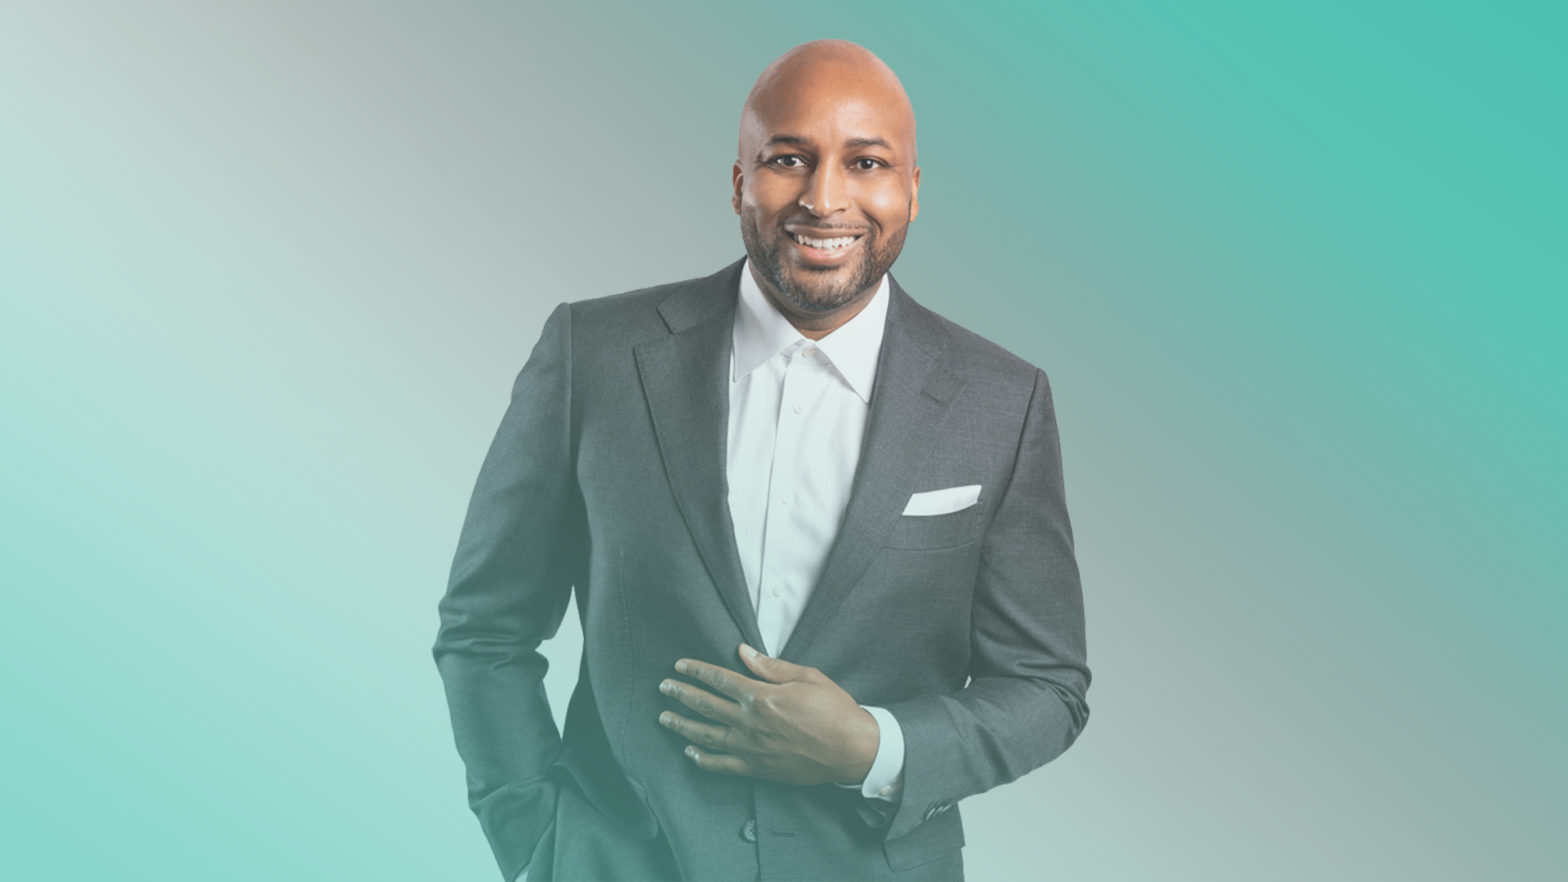 MaC VC Managing Partner Marlon Nichols Gives A Play-By-Play On Investing In Valuable Companies